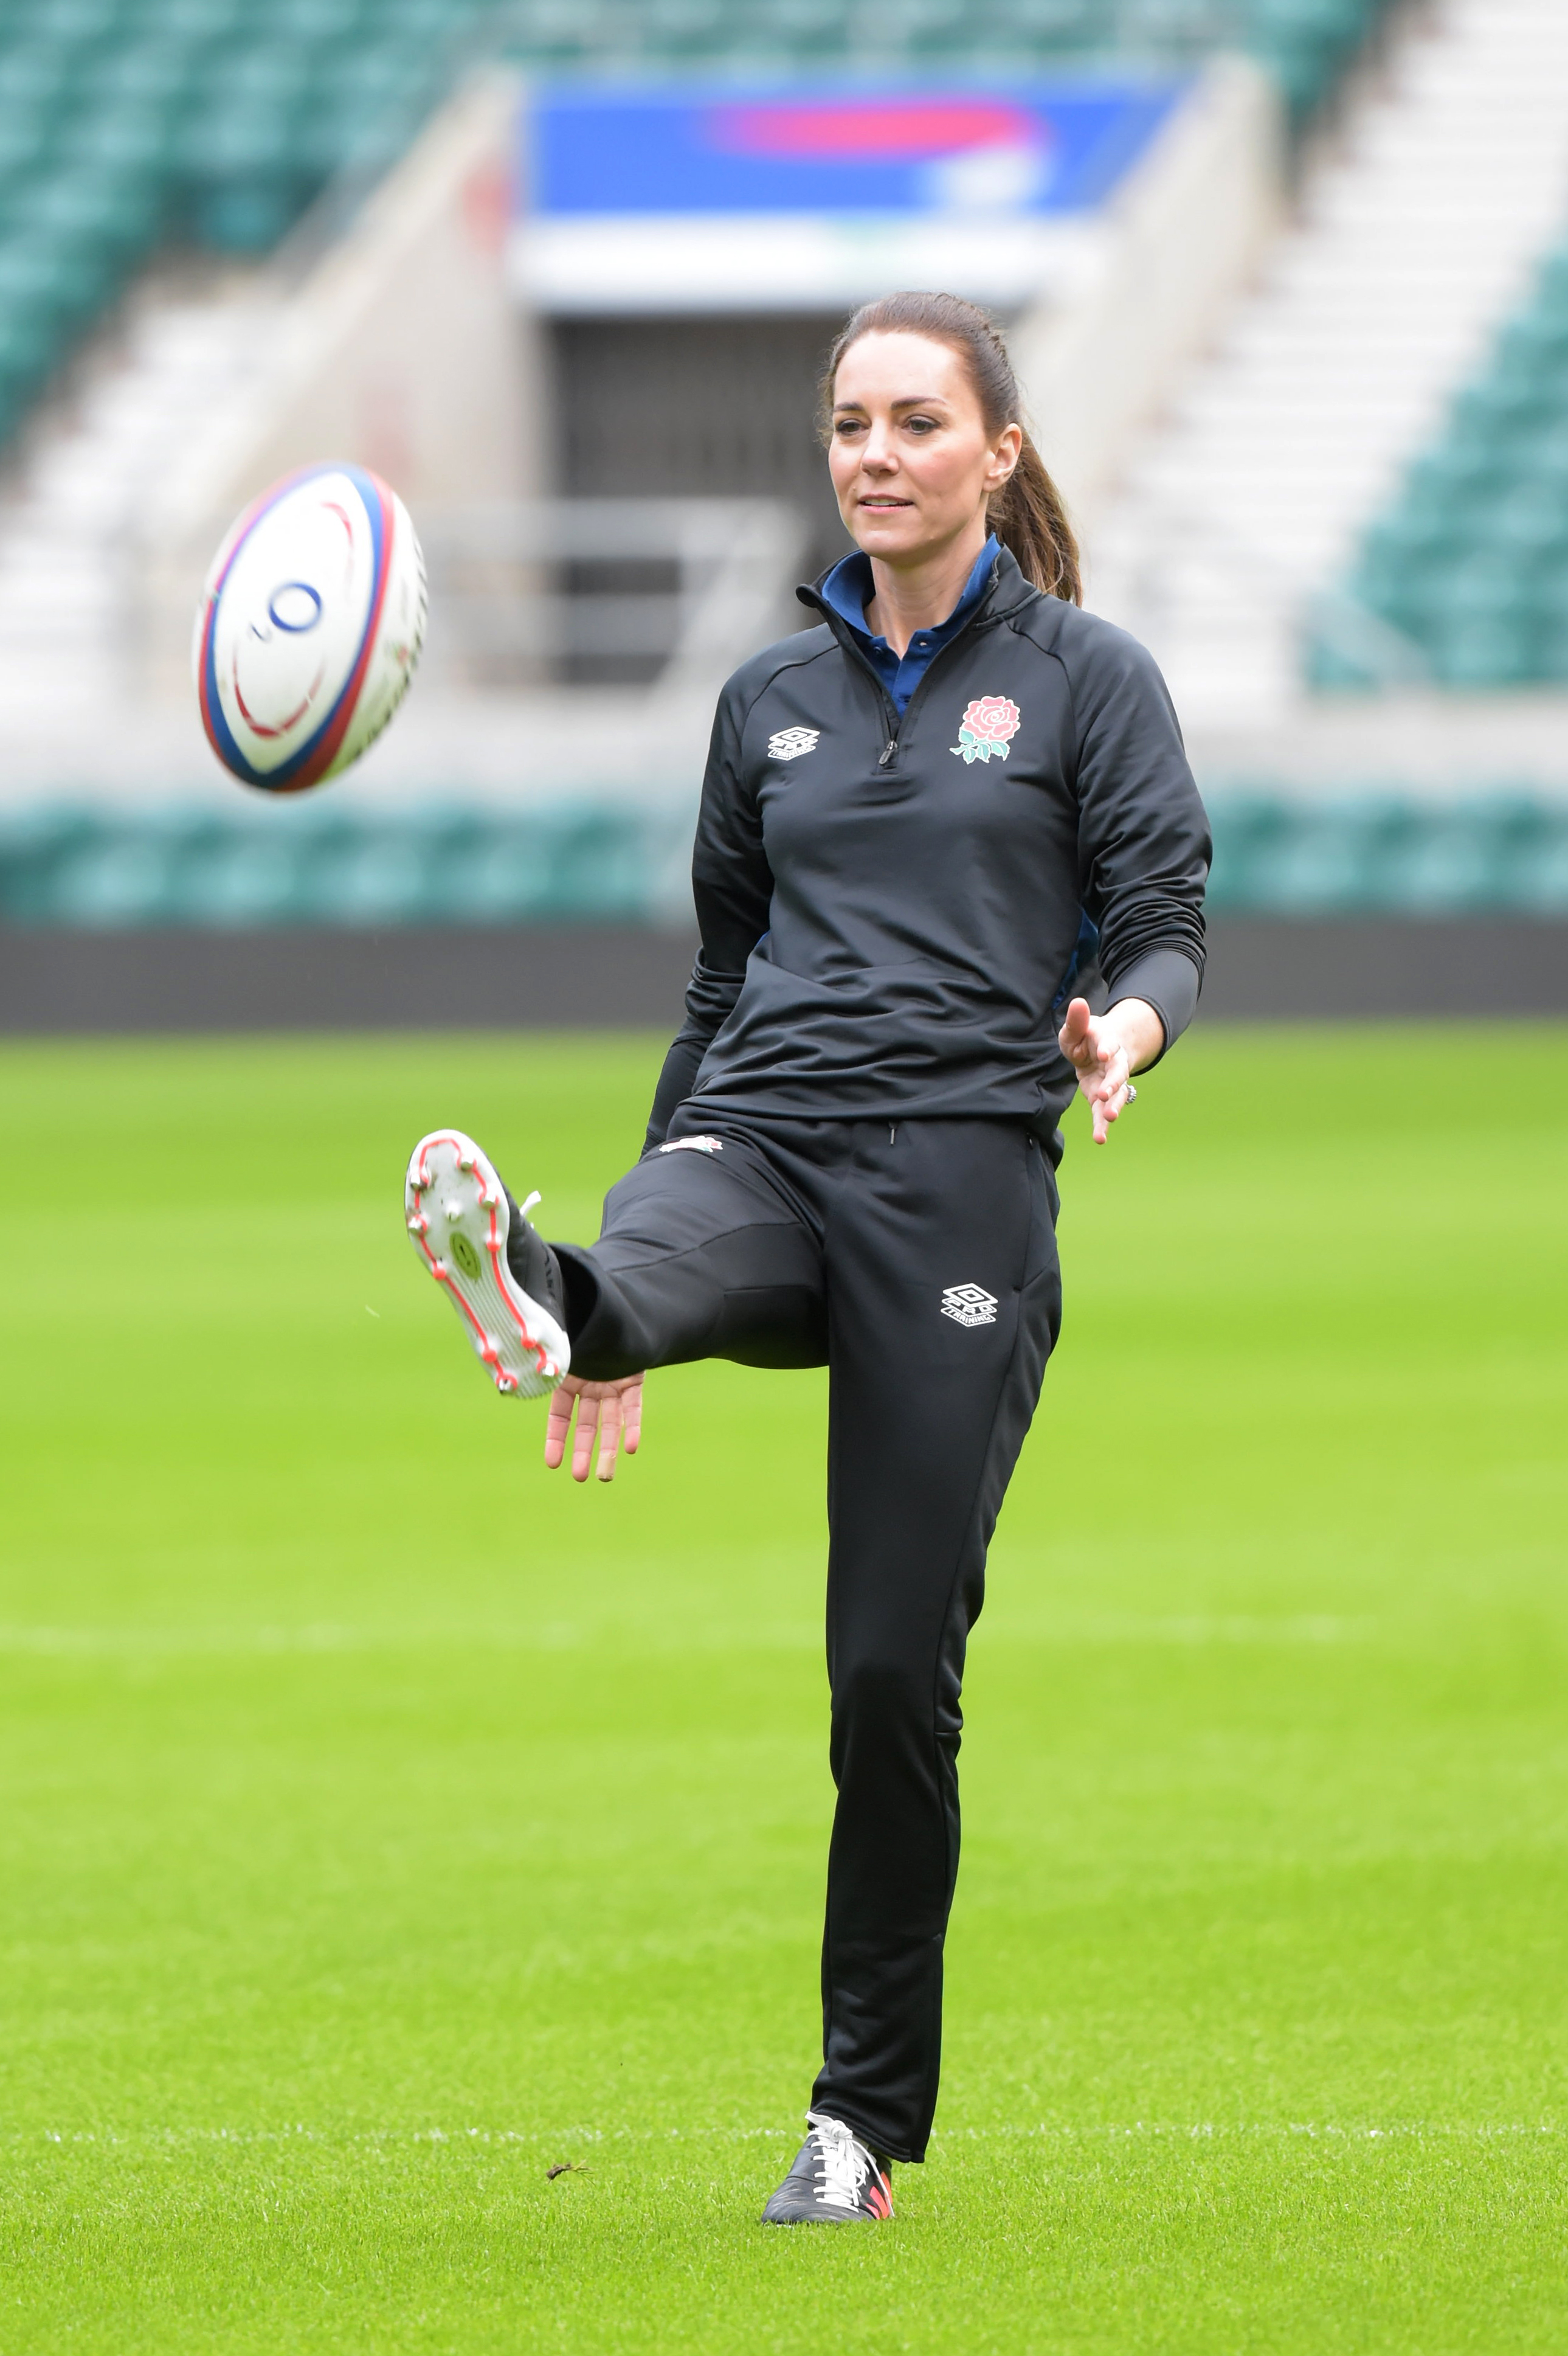 Princess Catherine playing rugby during an England Rugby Training Session after she became a Patron of the Rugby Football Union in London, England on February 2, 2022 | Source: Getty Images